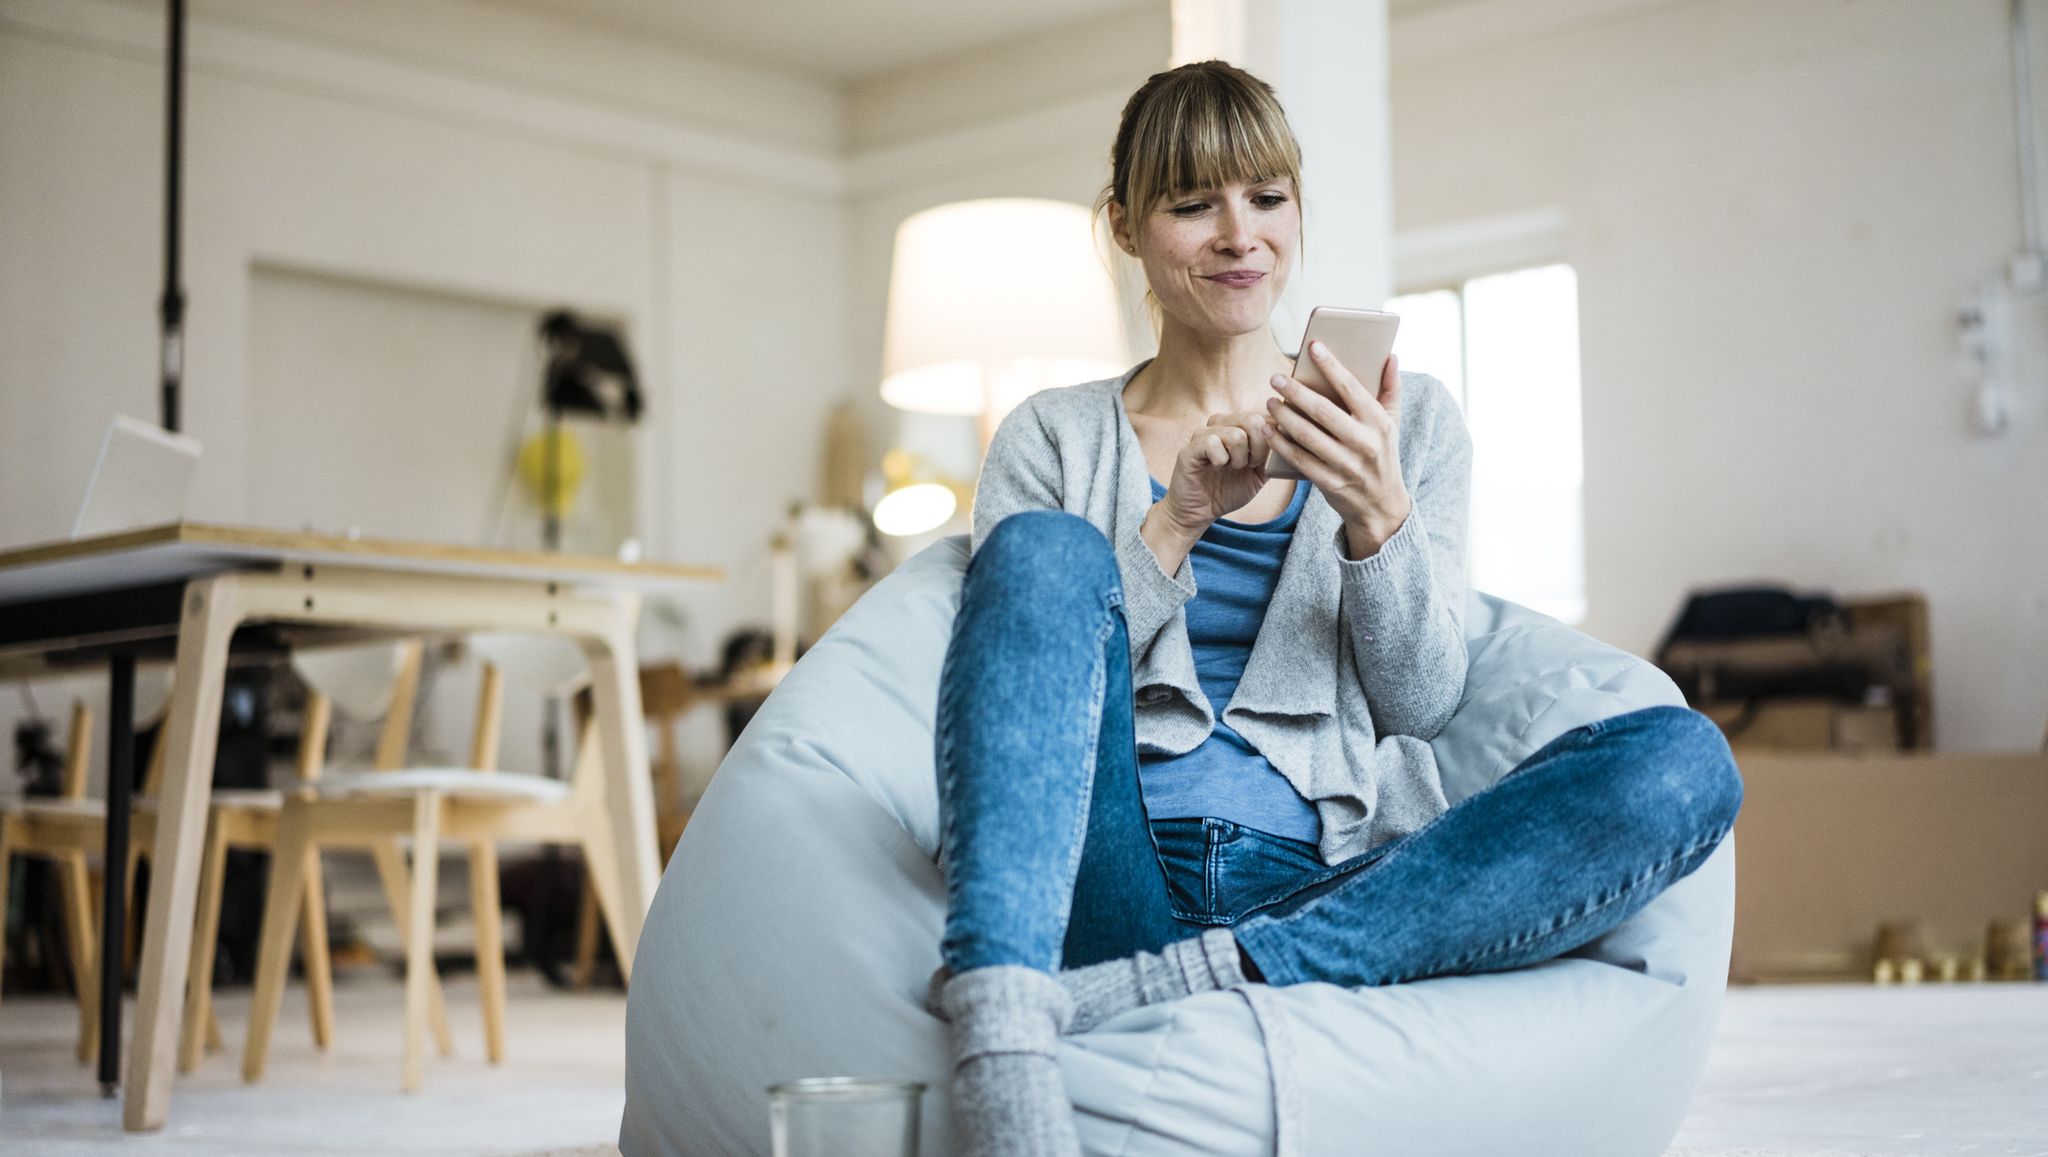 Smiling woman sitting in beanbag using cell phone